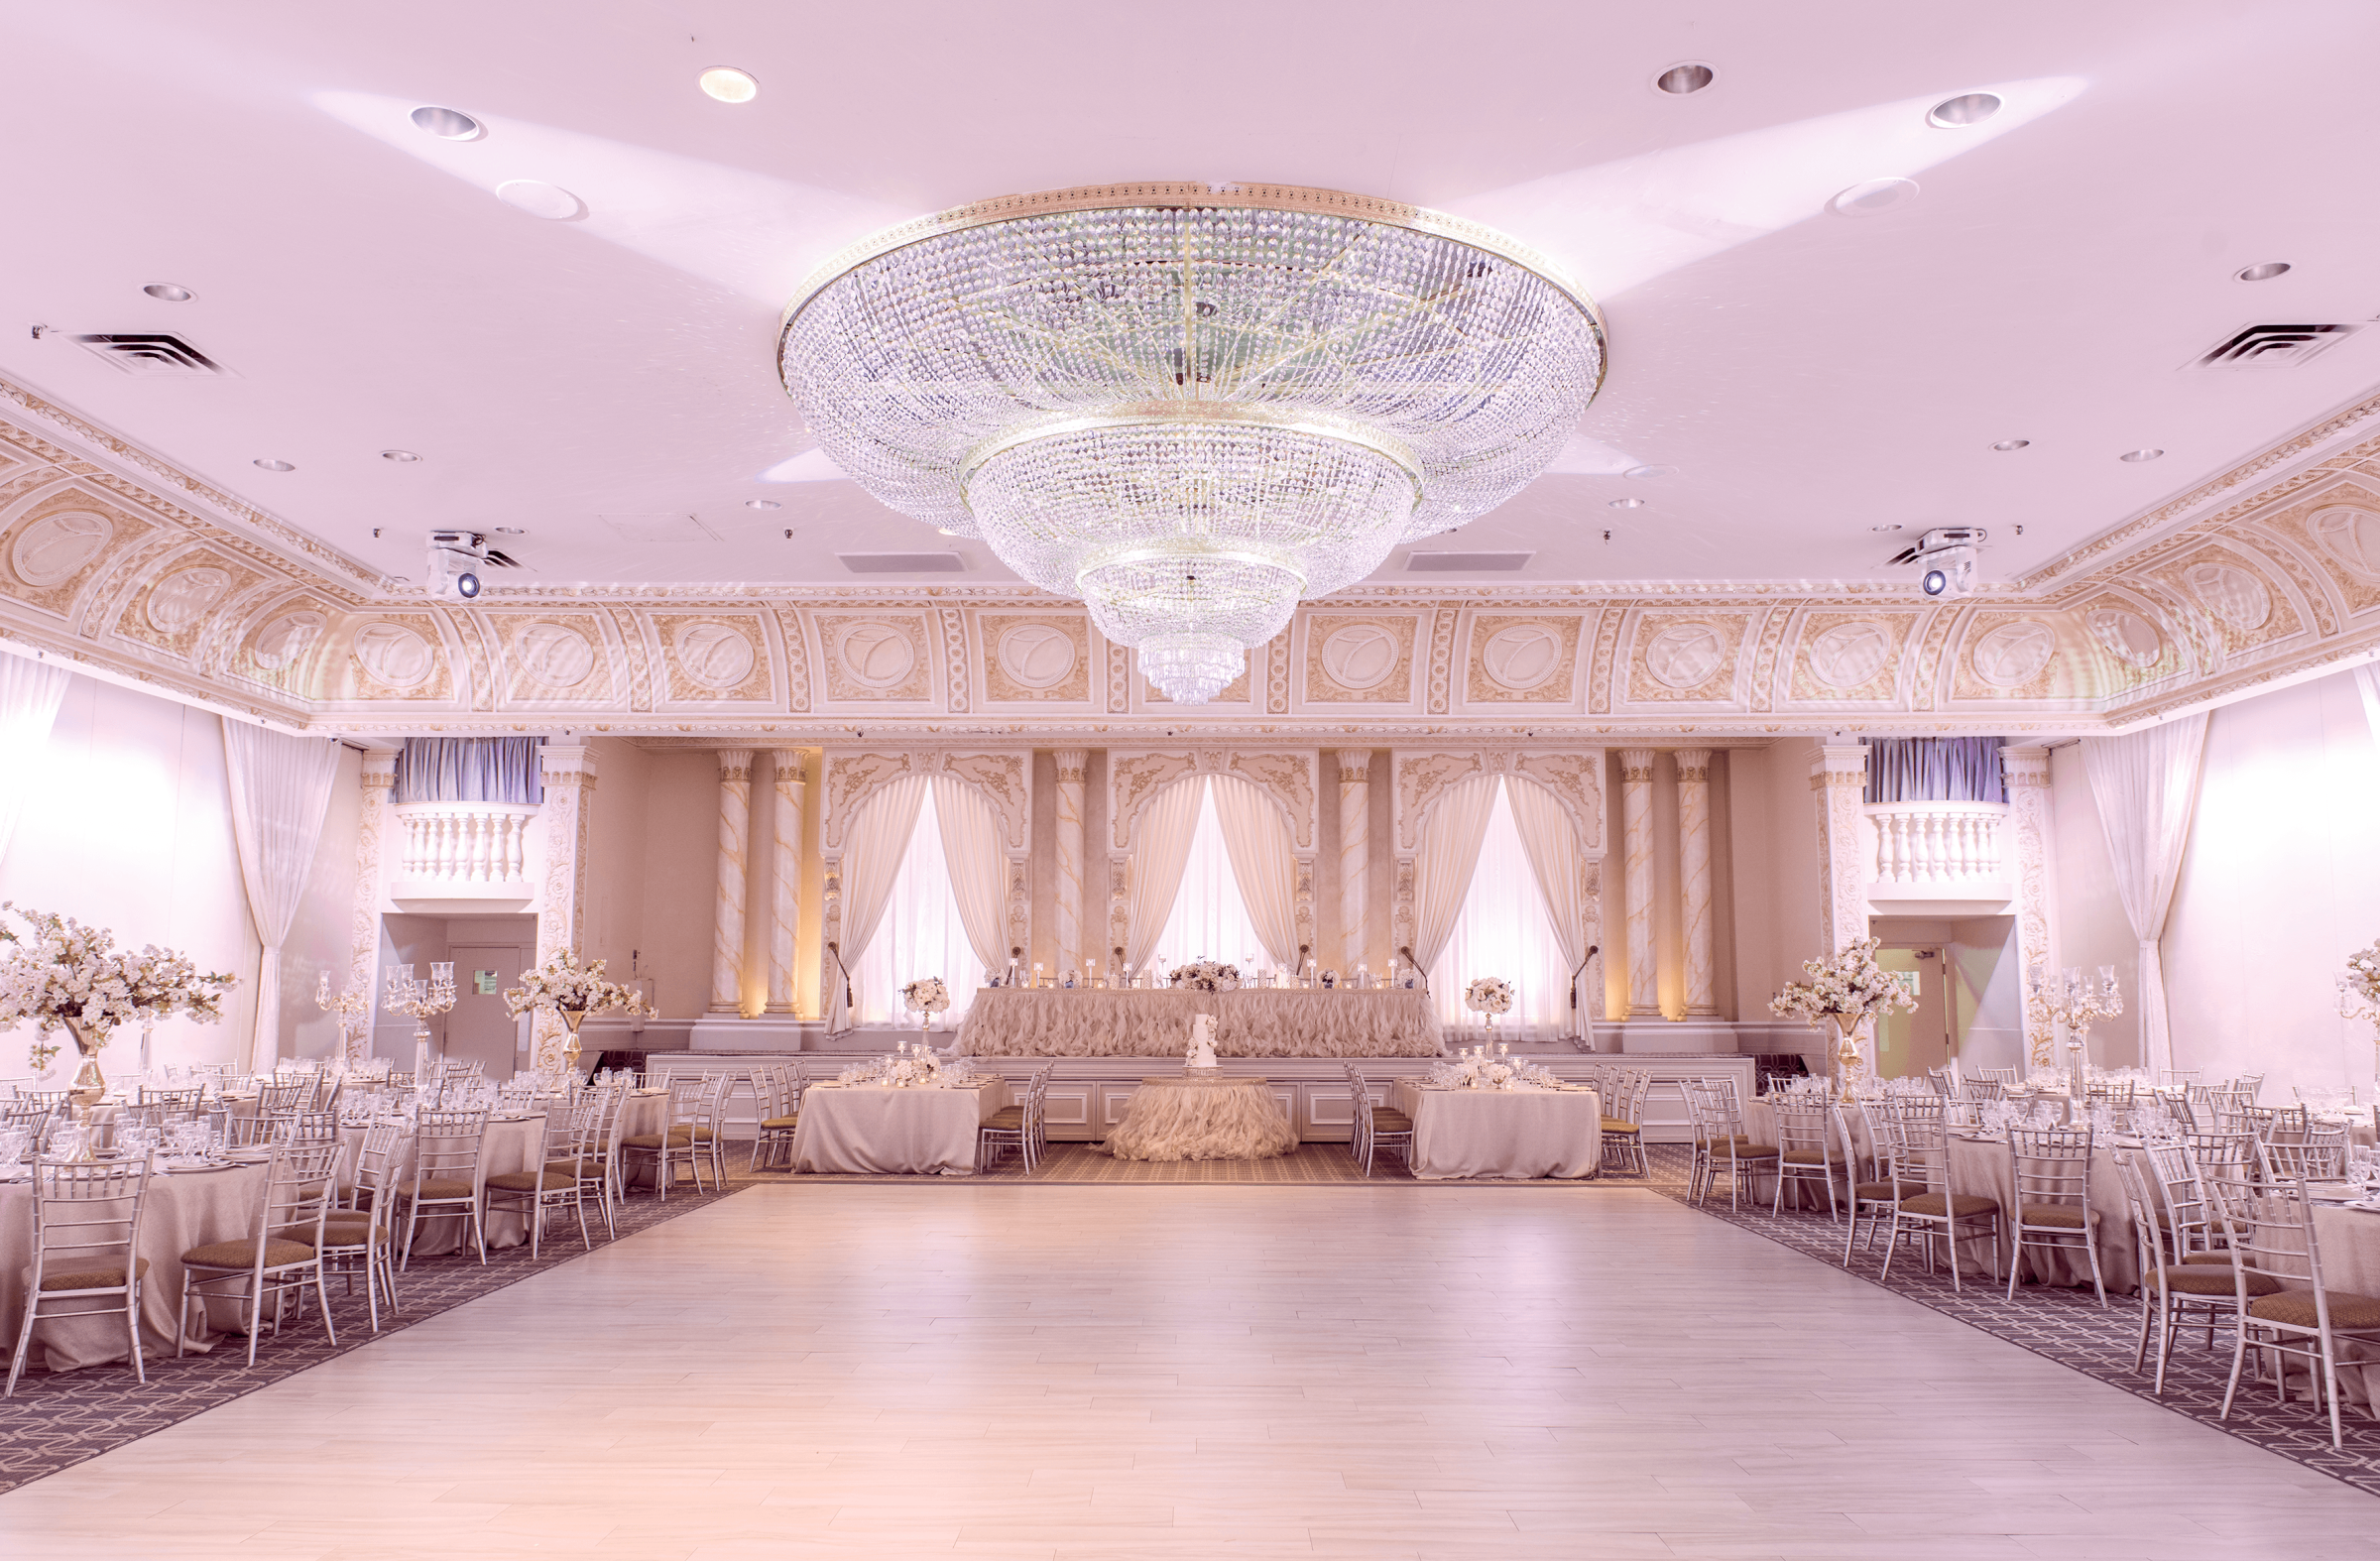 A wide shot of a ballroom with a dance floor and a chandelier.